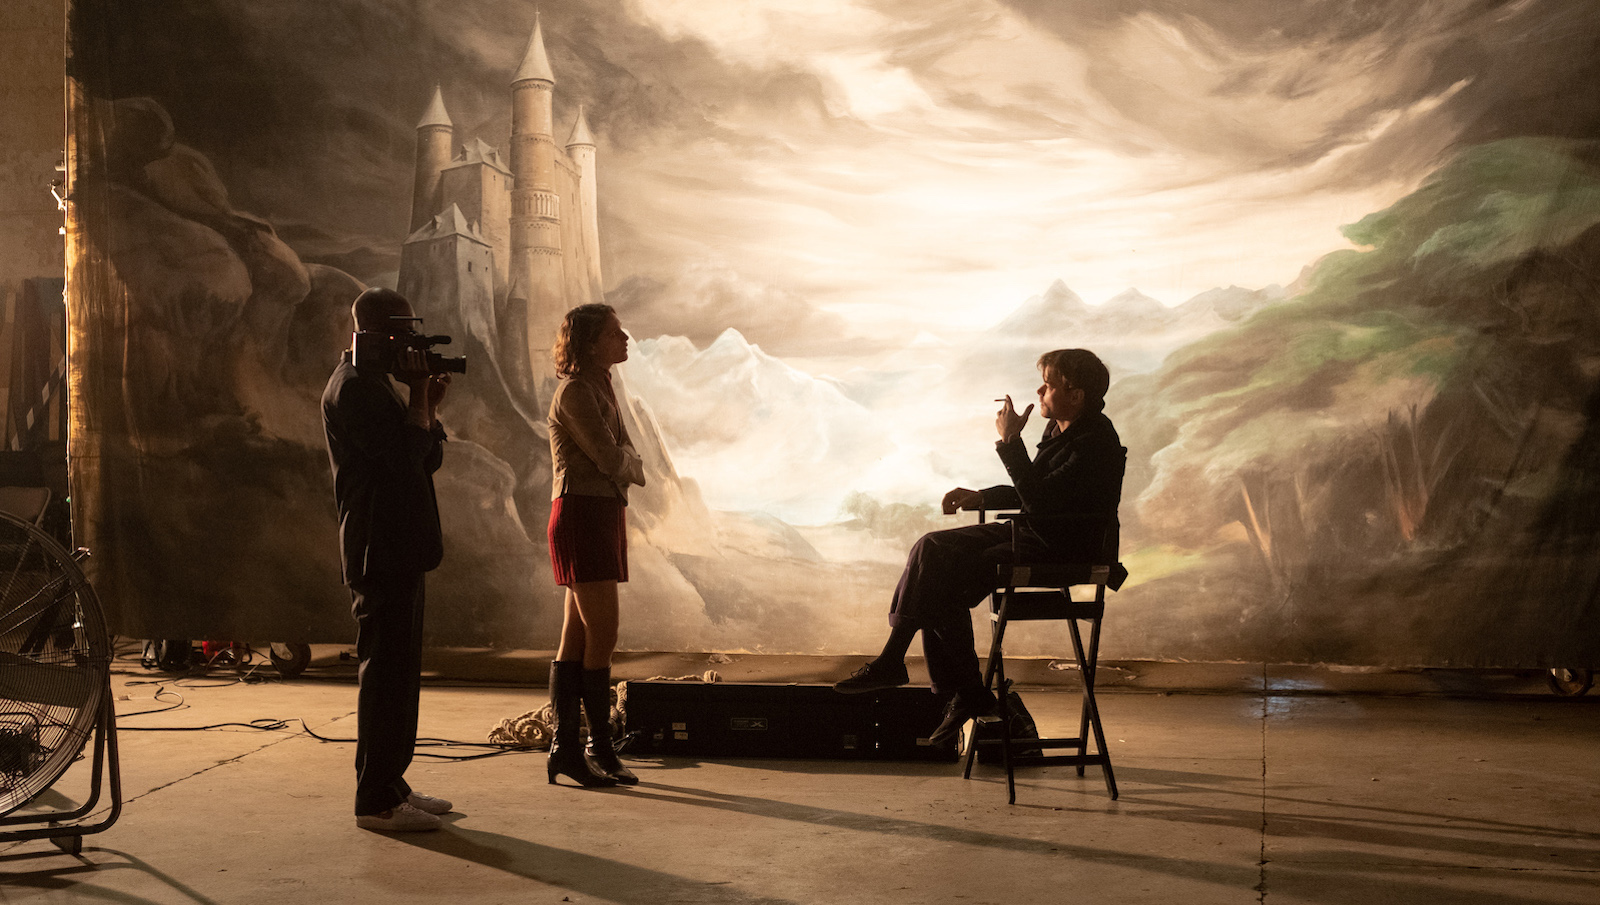 Three people in silhouette, one sitting in a director's chair, on a movie set.